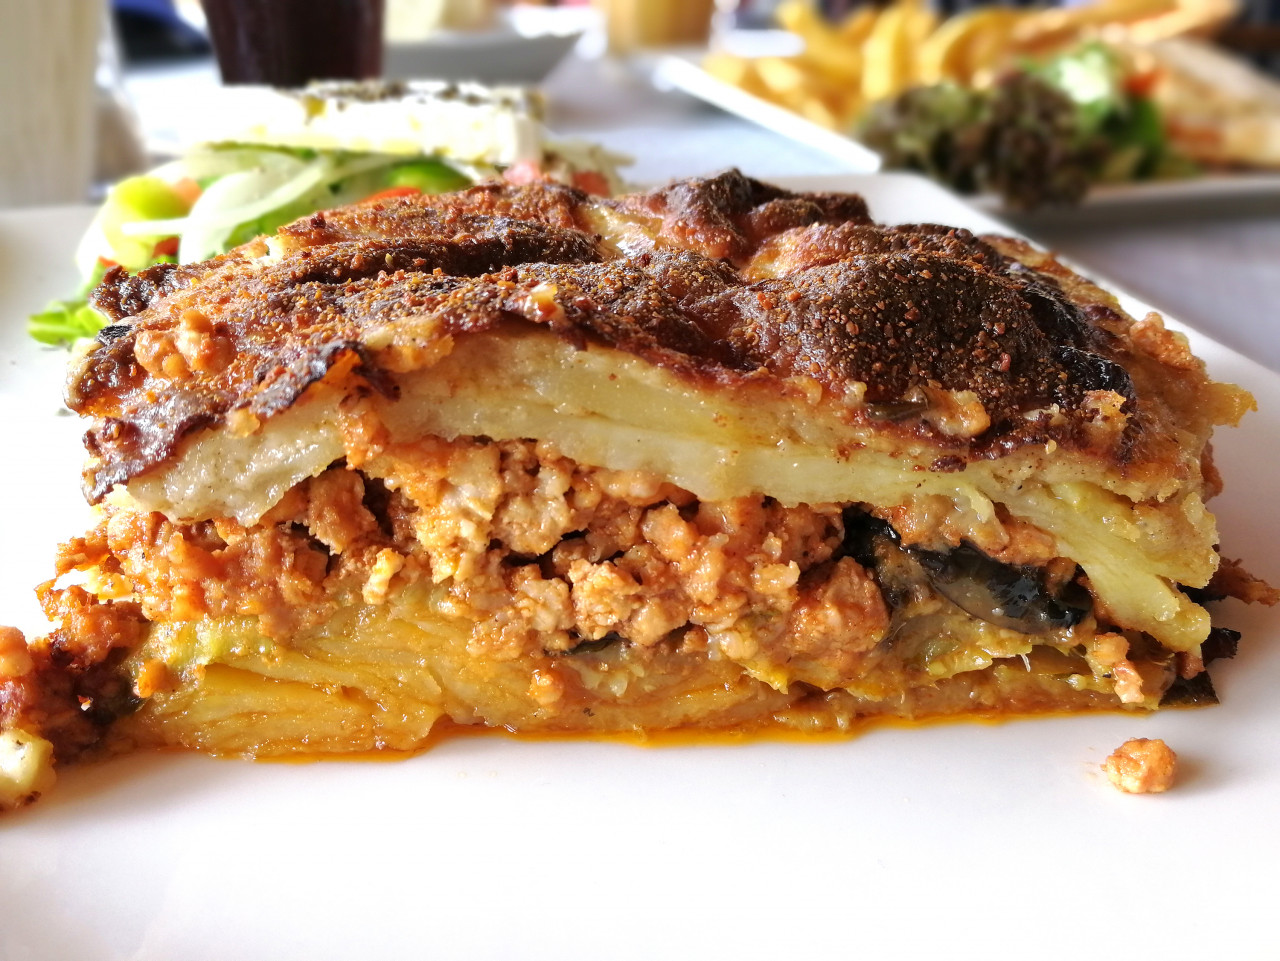 moussaka close up side view traditional greek dish baked layers eggplant meat potatoes bechamel sauce